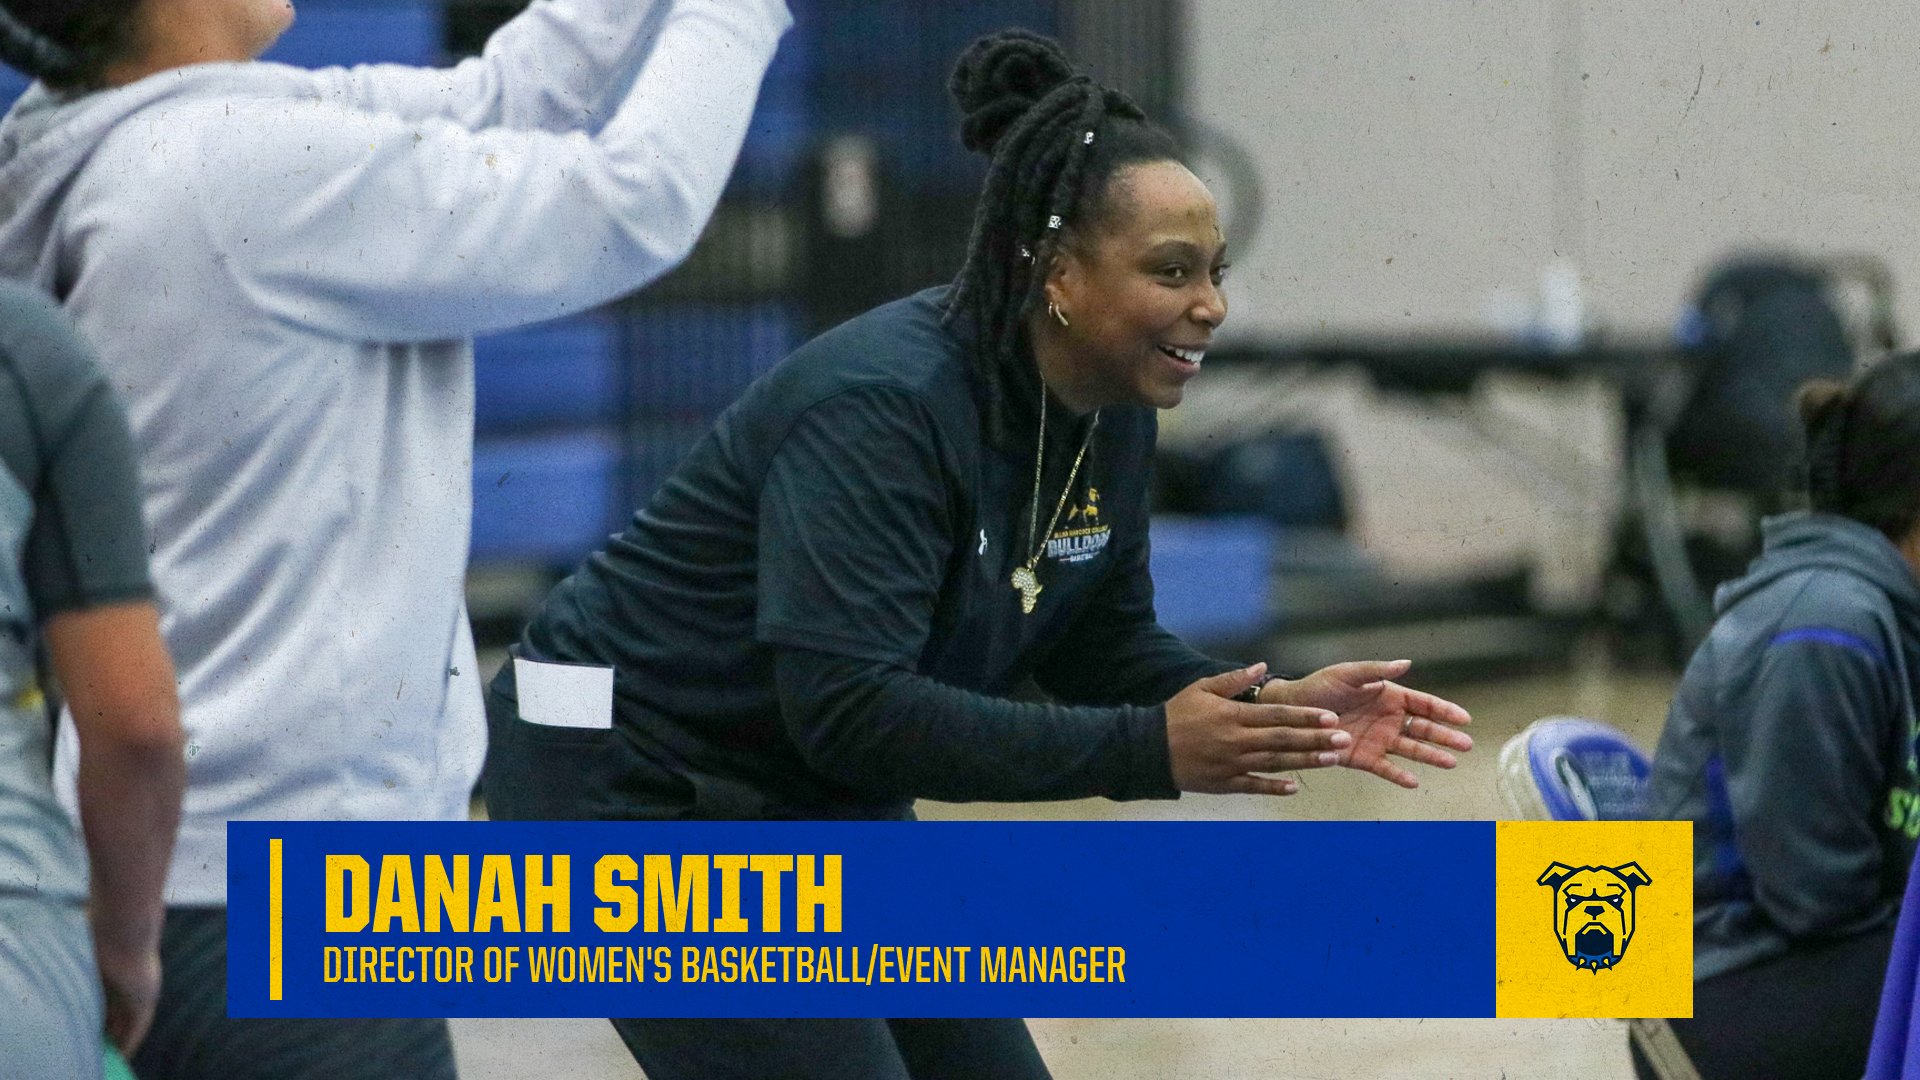 Danah Smith Named to Take Reigns of Women's Basketball Program